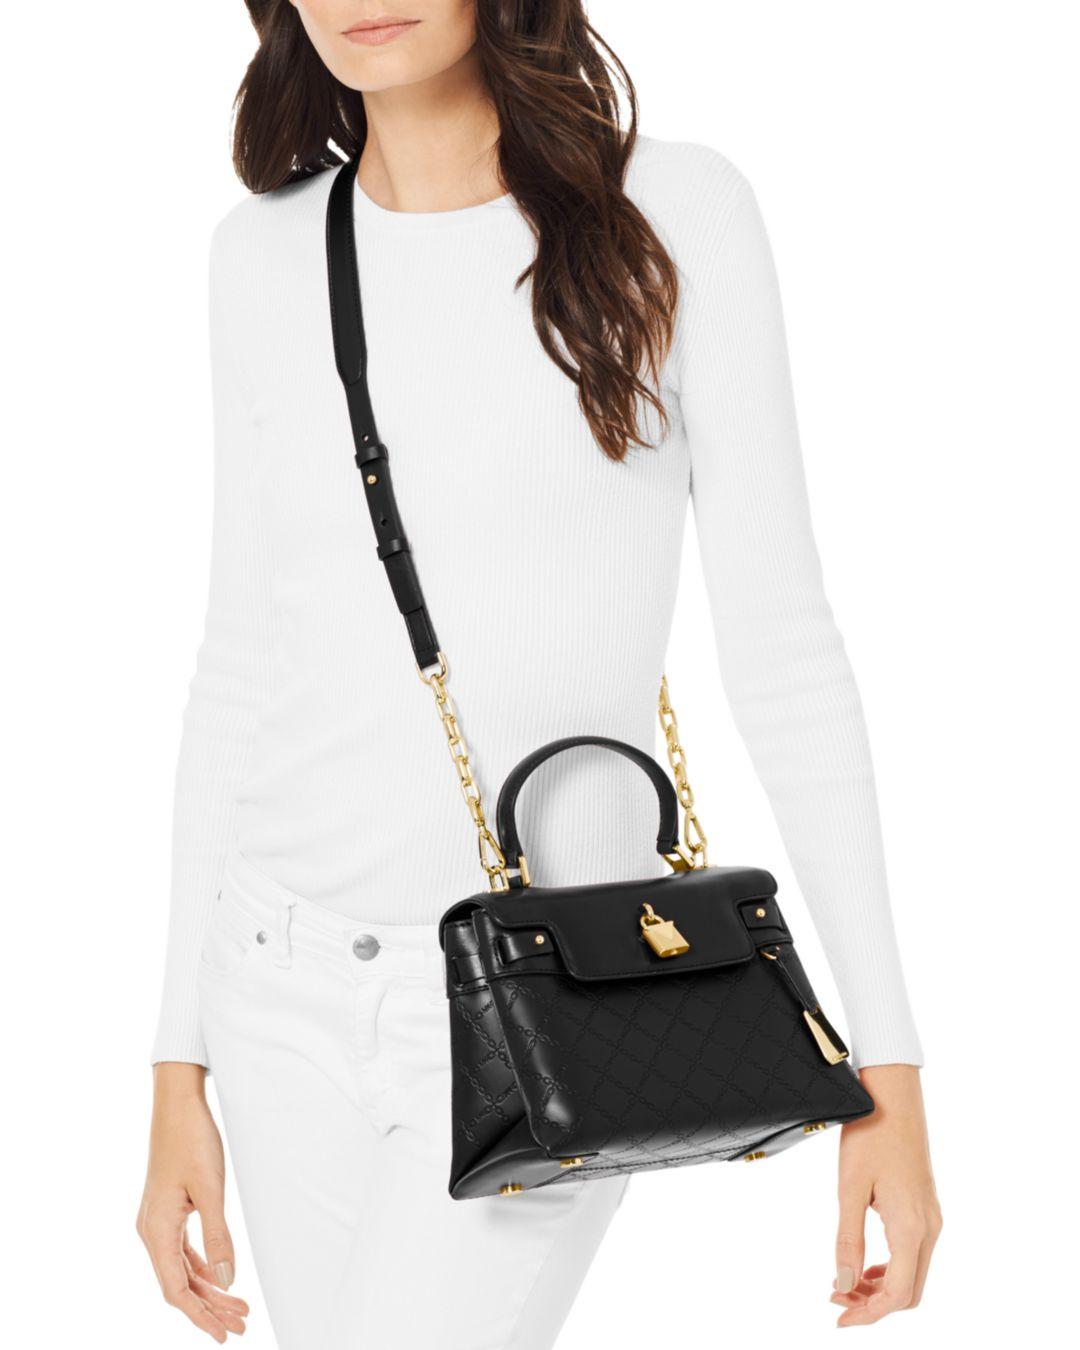 gramercy chain embossed leather top handle satchel